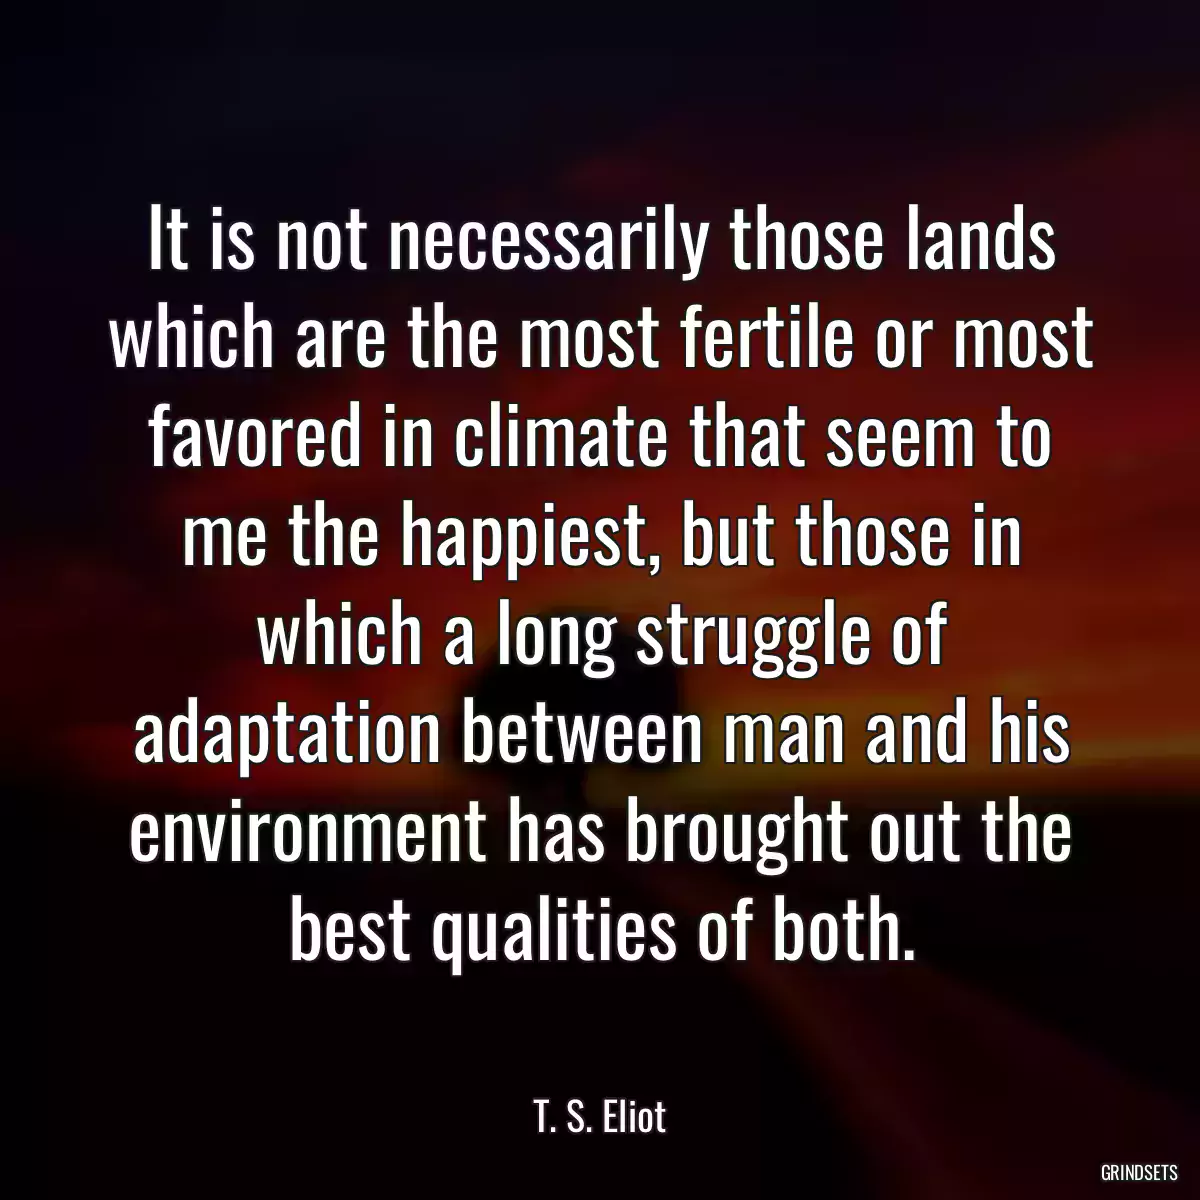 It is not necessarily those lands which are the most fertile or most favored in climate that seem to me the happiest, but those in which a long struggle of adaptation between man and his environment has brought out the best qualities of both.